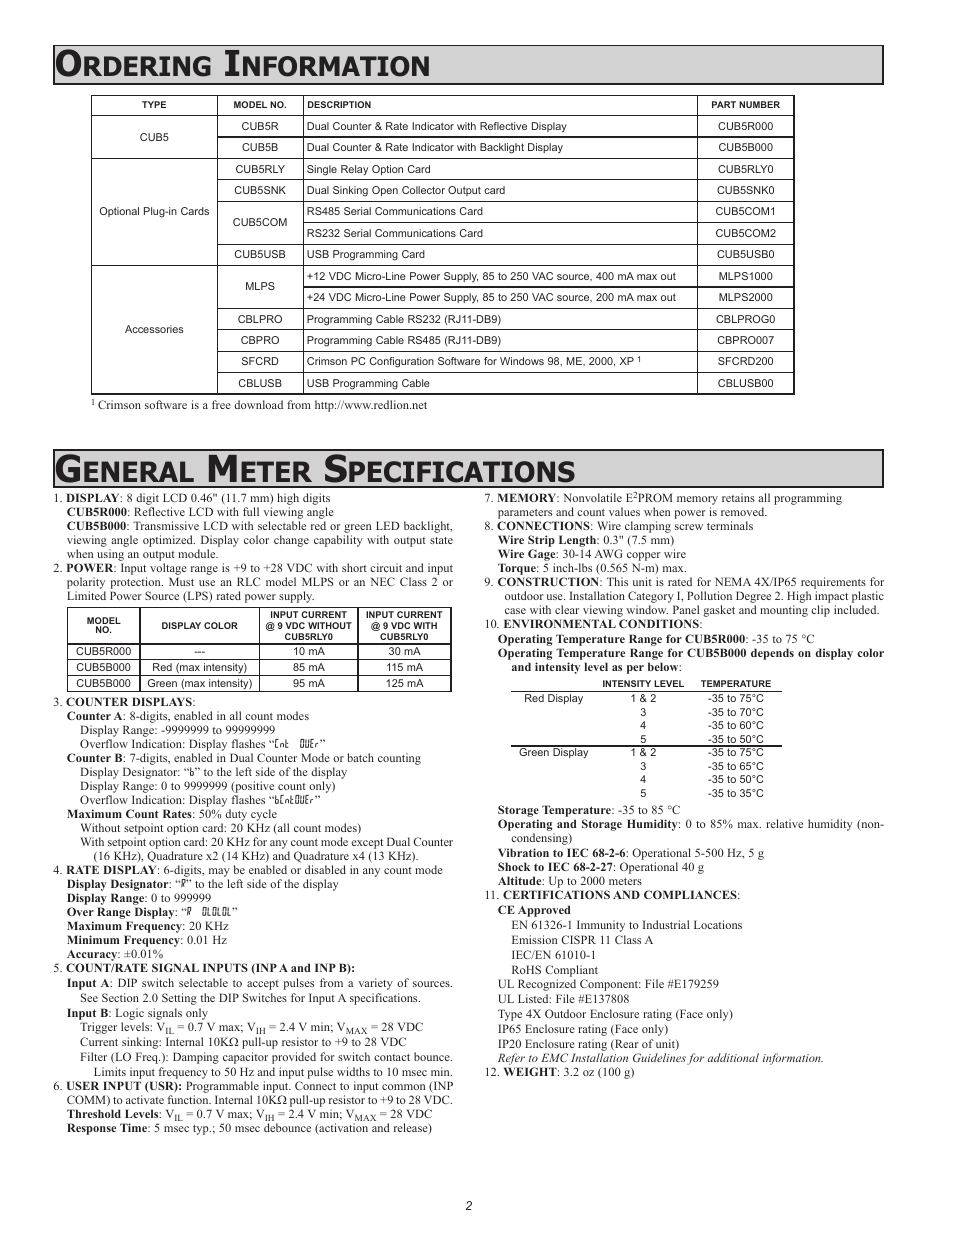 Eneral, Eter, Pecifications | Red Lion CUB5 User Manual | Page 2 / 16